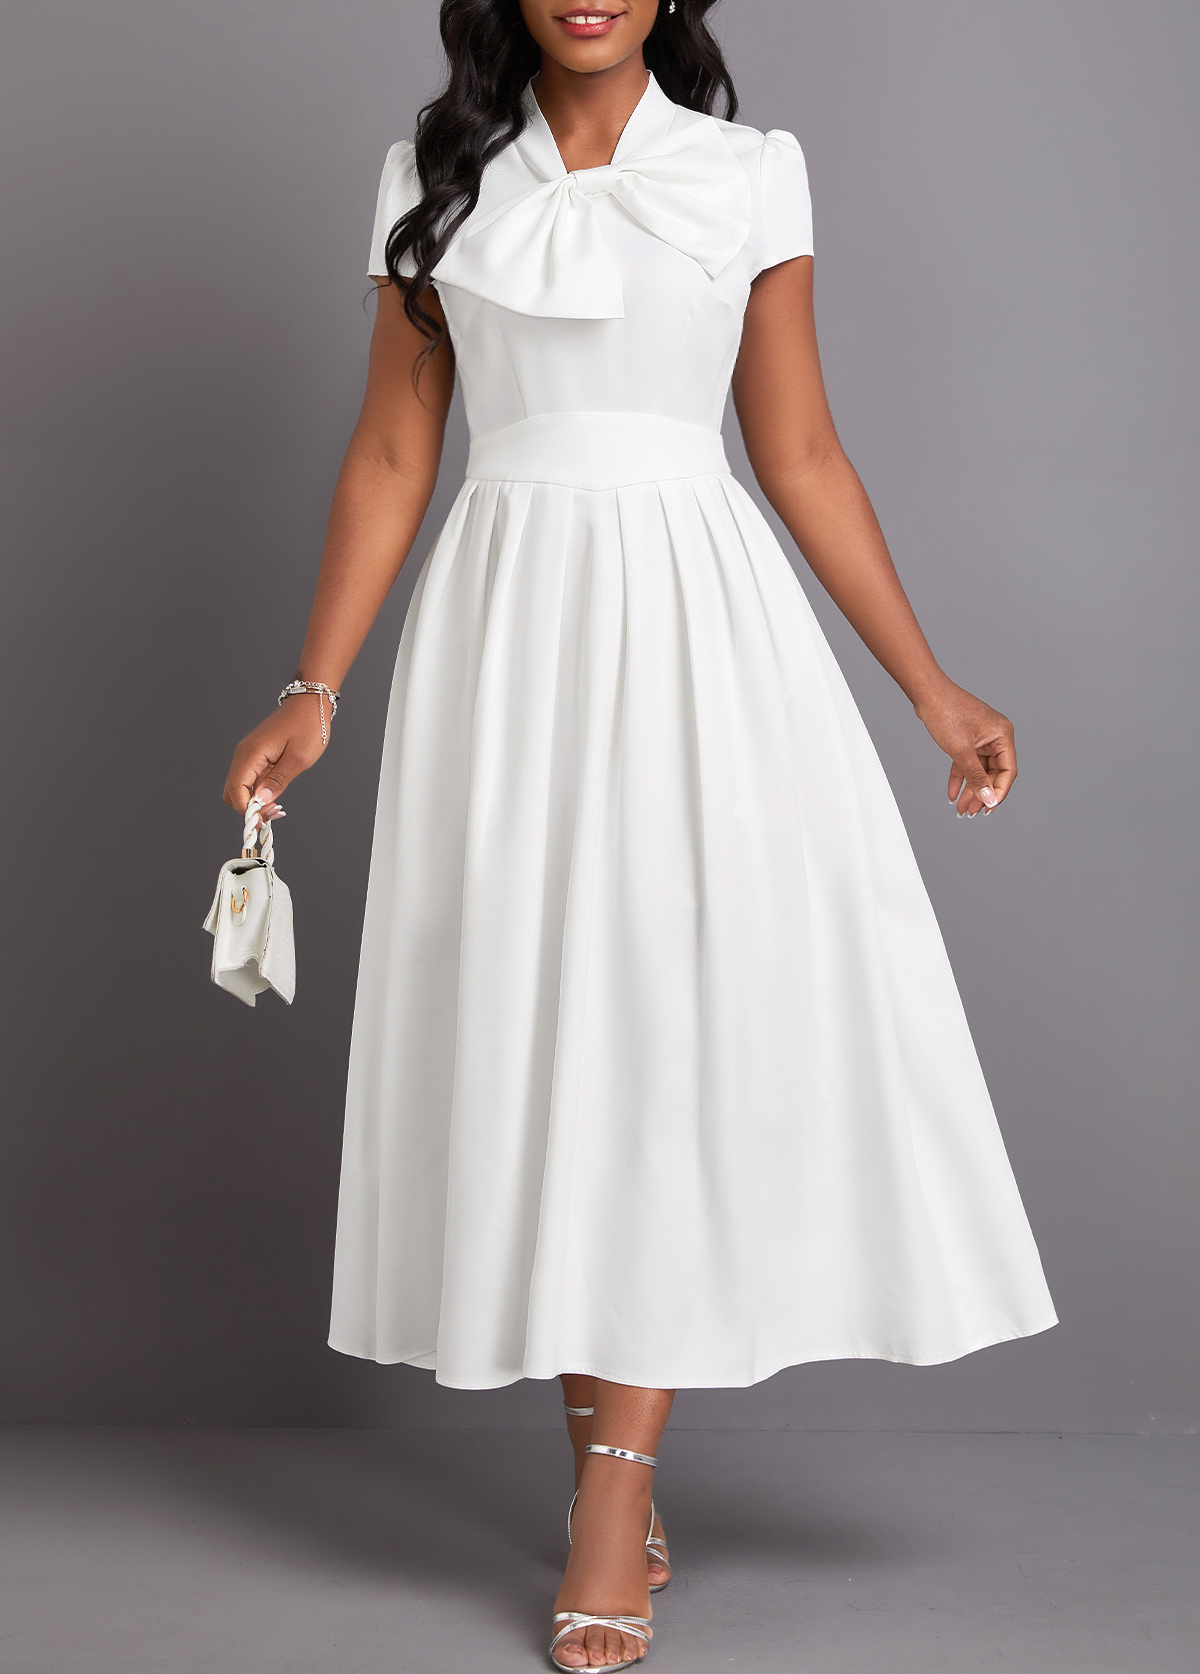 Bowknot White Short Sleeve Stand Collar Dress